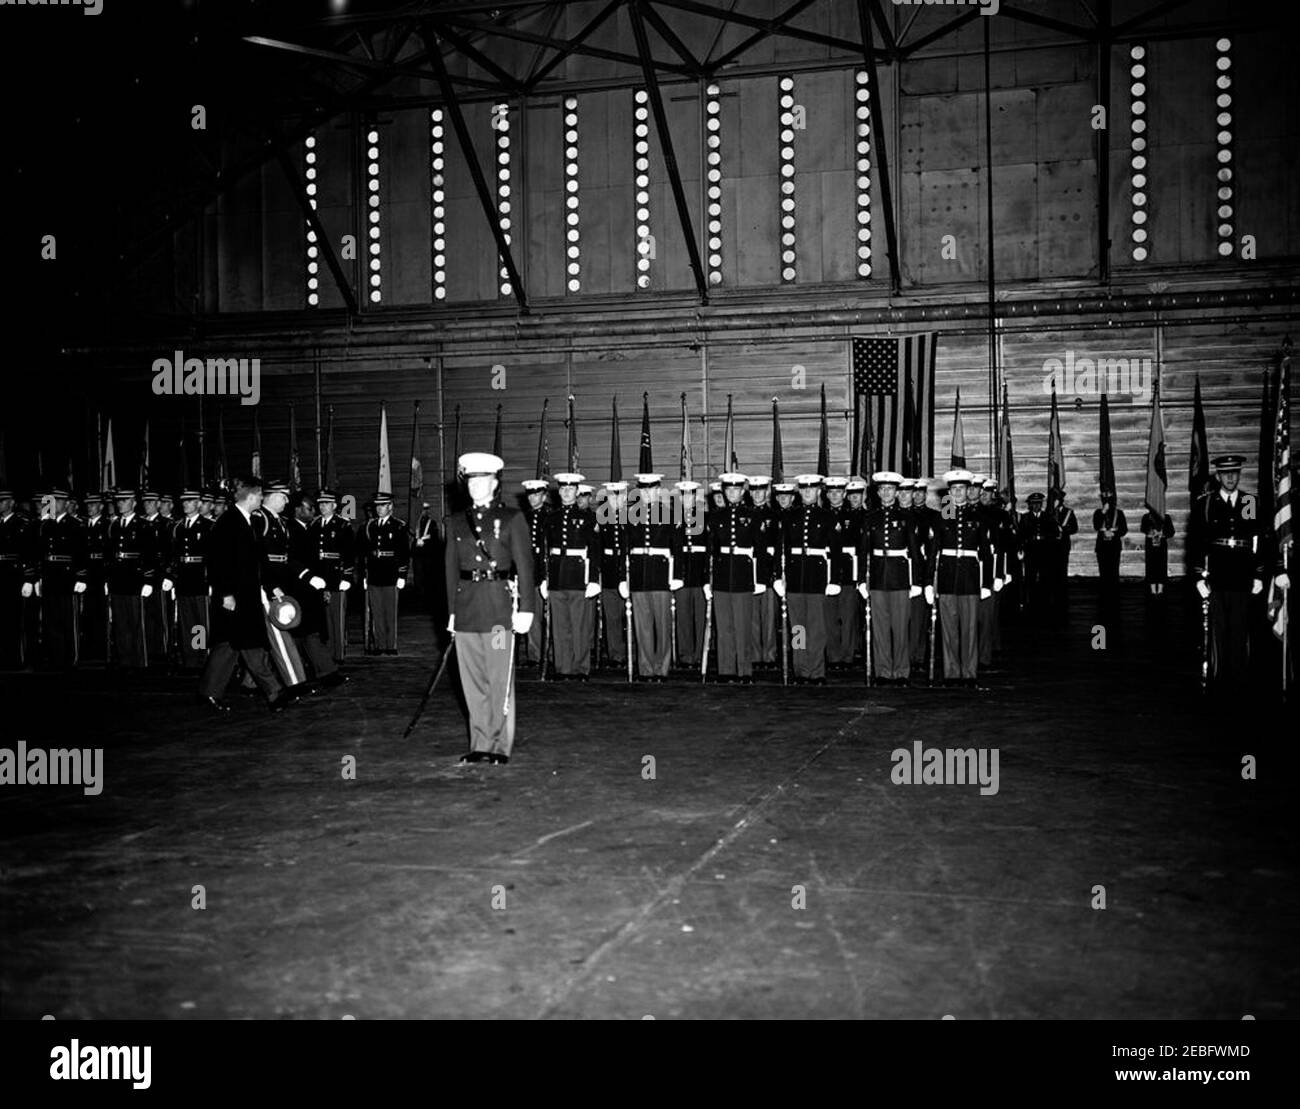 Arrival ceremonies for Kwame Nkrumah, President of Ghana, 3:43PM. President John F. Kennedy (walking at left) and President of the Republic of Ghana, Osagyefo Dr. Kwame Nkrumah, review U.S. Army Honor Guard and Marine Corps Honor Guard troops with Commander of Troops, Lieutenant Colonel Charles P. Murray, Jr., during arrival ceremonies in honor of President Nkrumah. Hangar #10, Military Air Transport Service (MATS) Terminal, Washington National Airport, Washington, D.C. Stock Photo